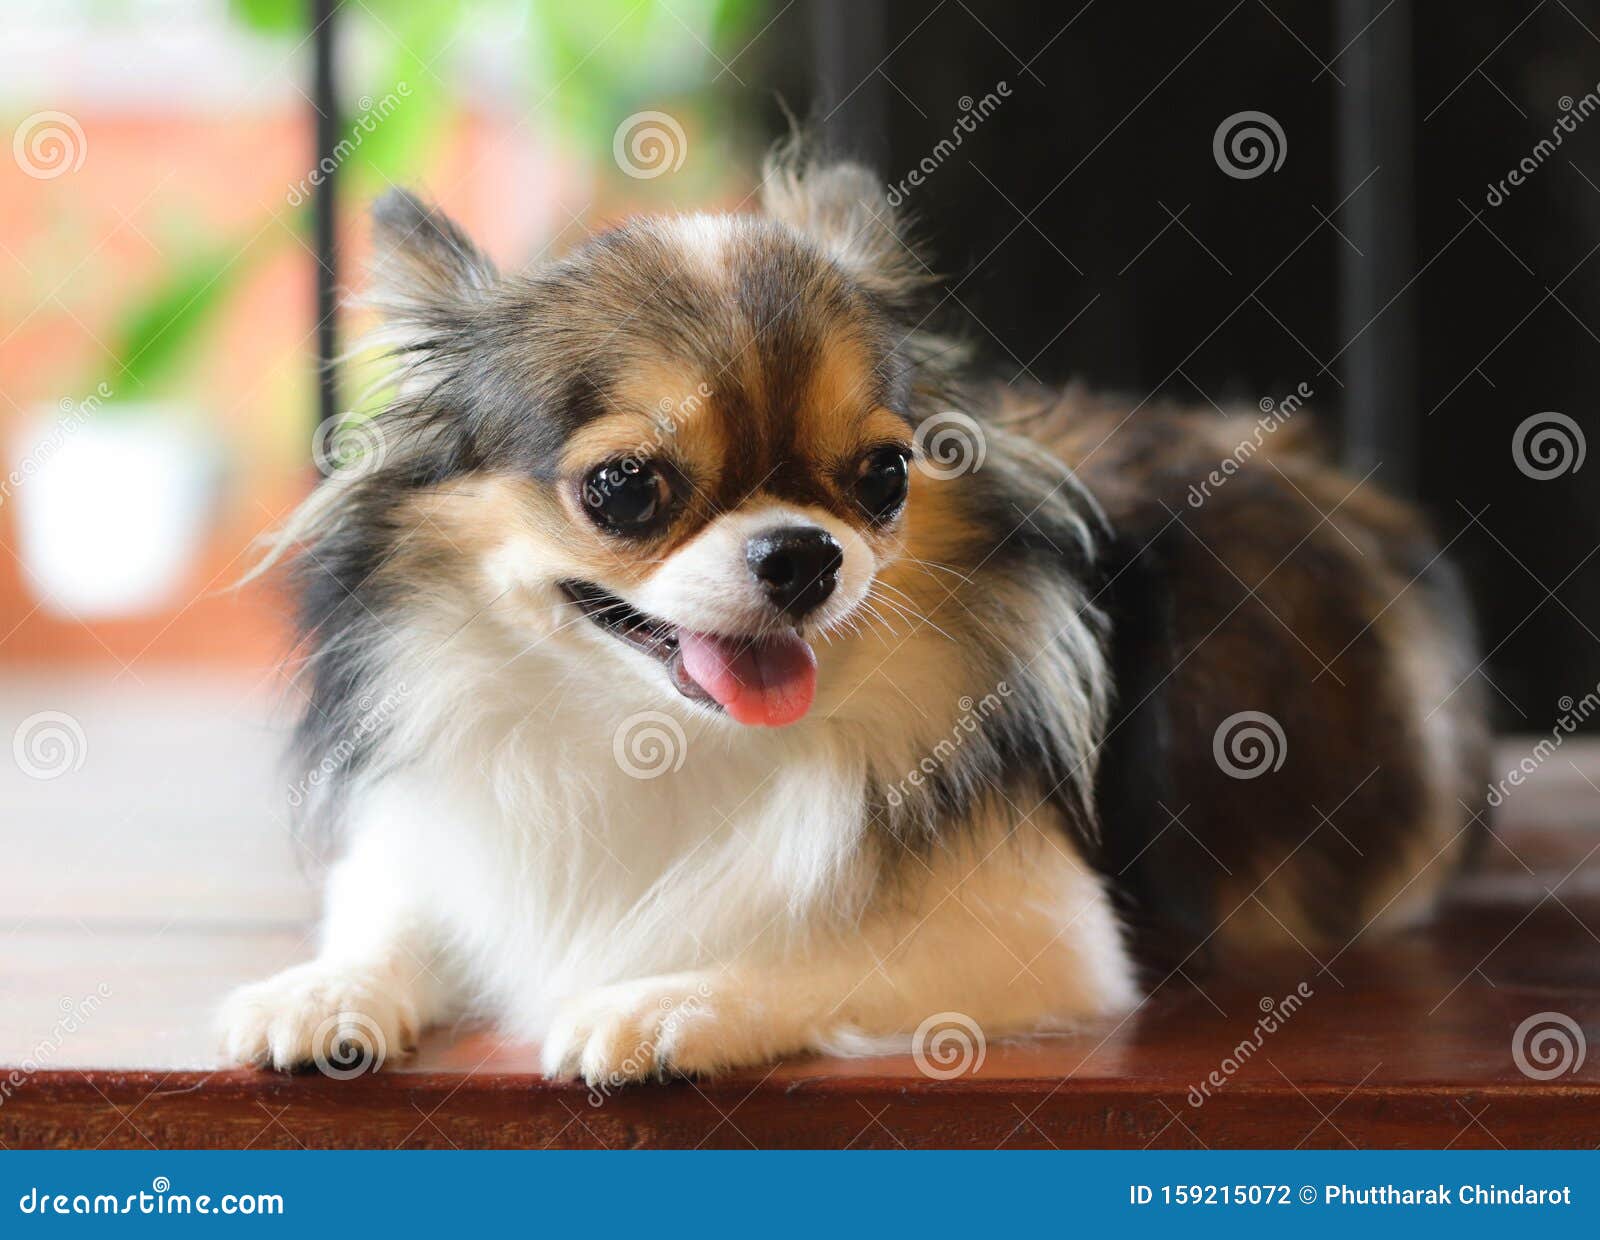 Portrait of Cute Long Hair with Black White and Brown Color Sitting on the  Wooden Garden Bench Stock Photo - Image of garden, dogs: 159215072